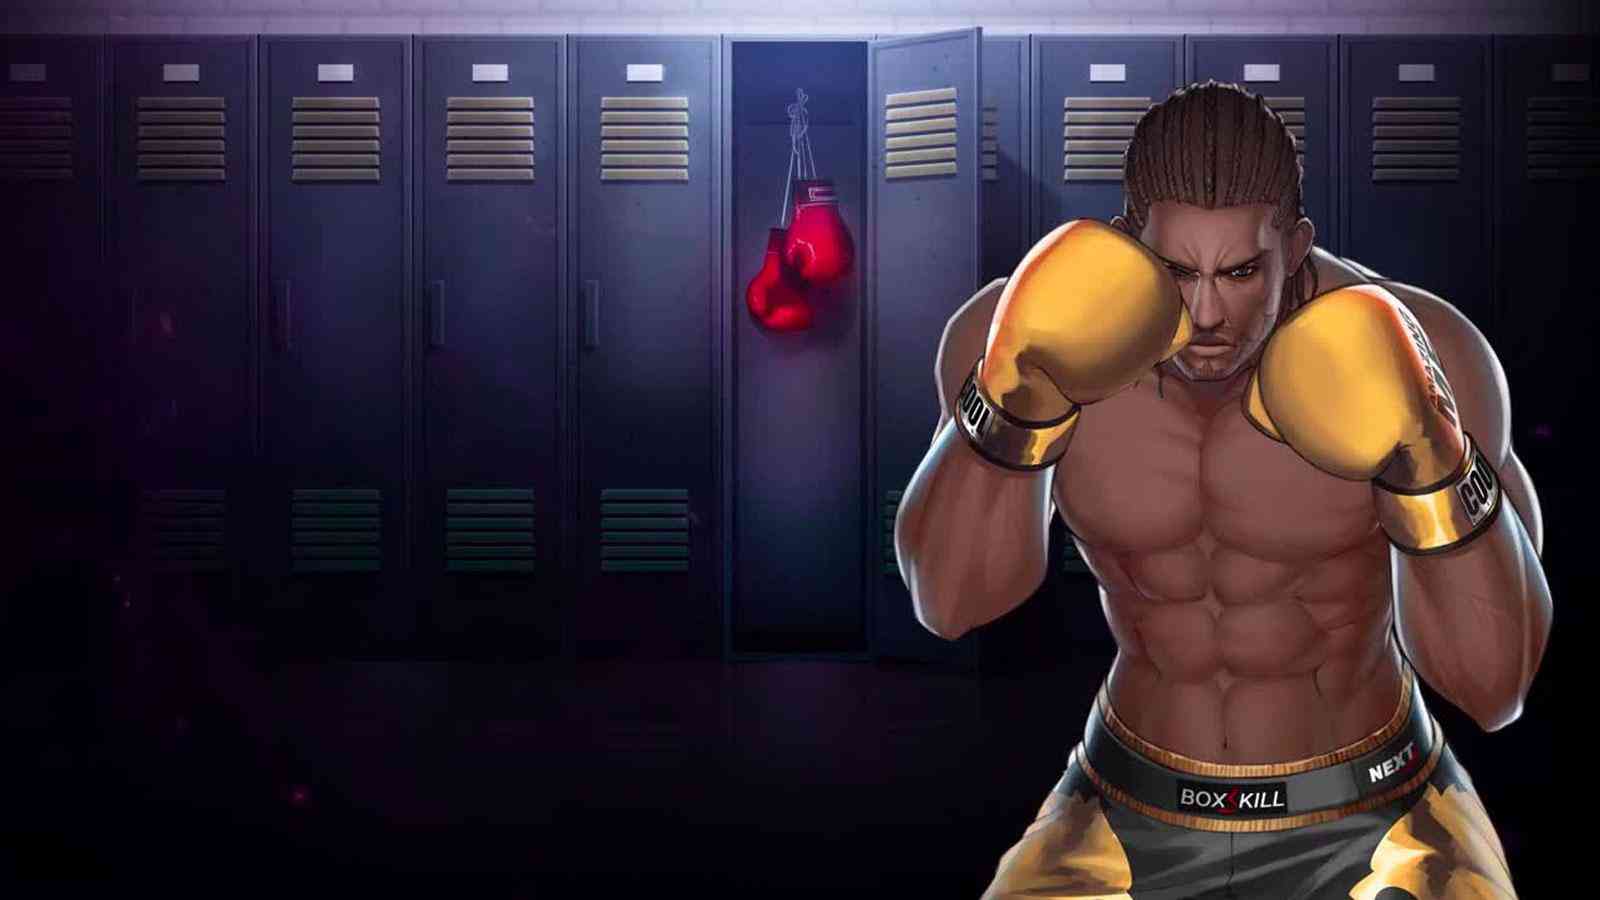 Boxing arena - fighting show in Environments - UE Marketplace